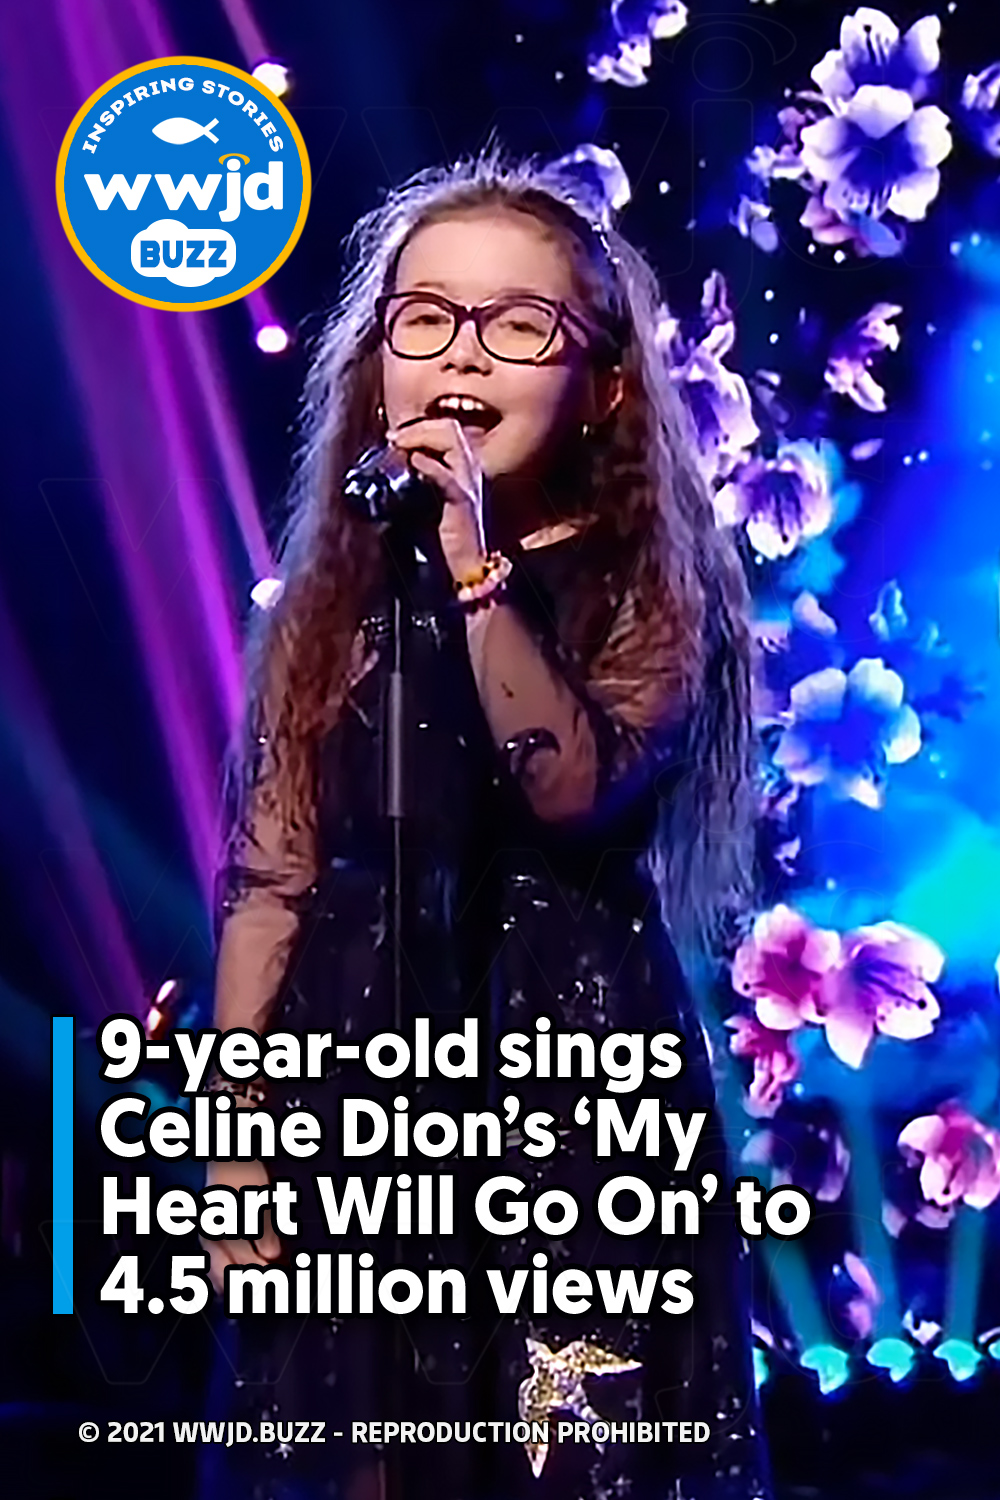 9-year-old sings Celine Dion’s ‘My Heart Will Go On’ to 4.5 million views